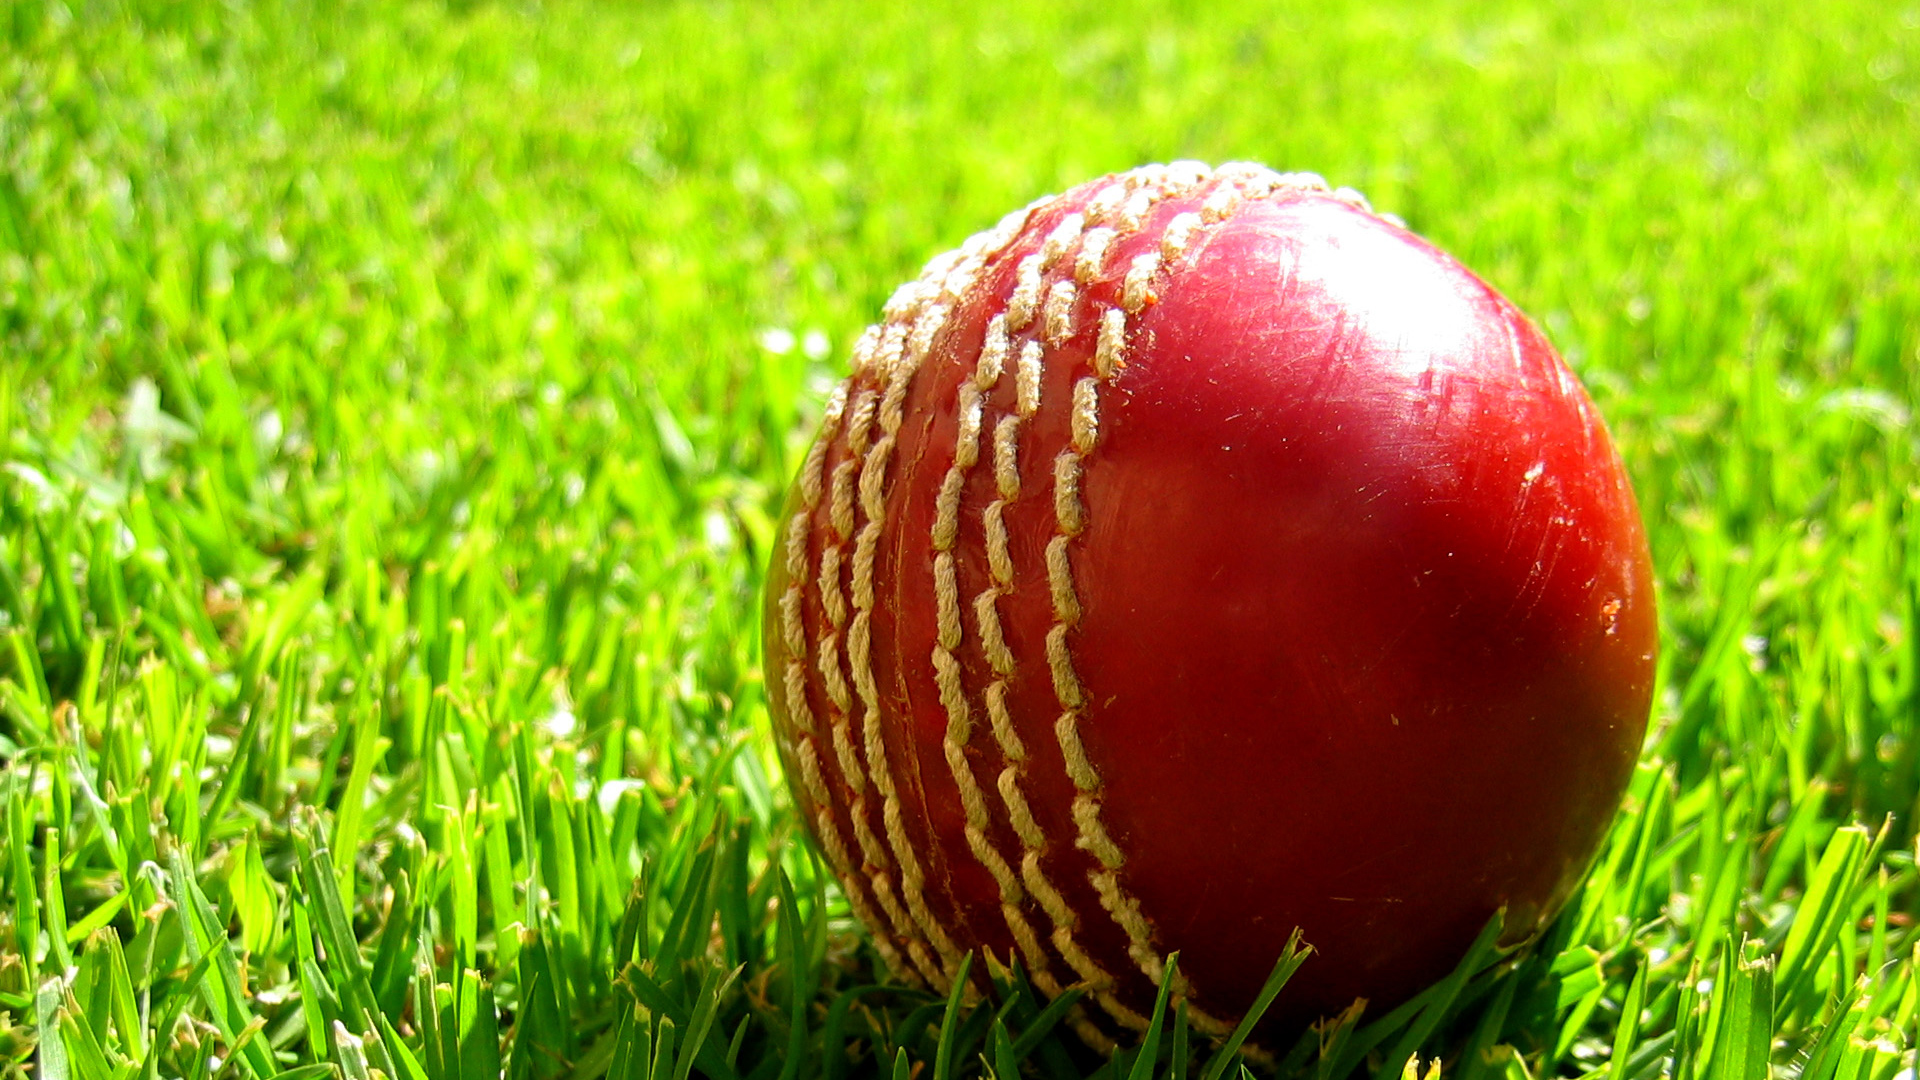 Download cricket s for ile phone free cricket hd pictures